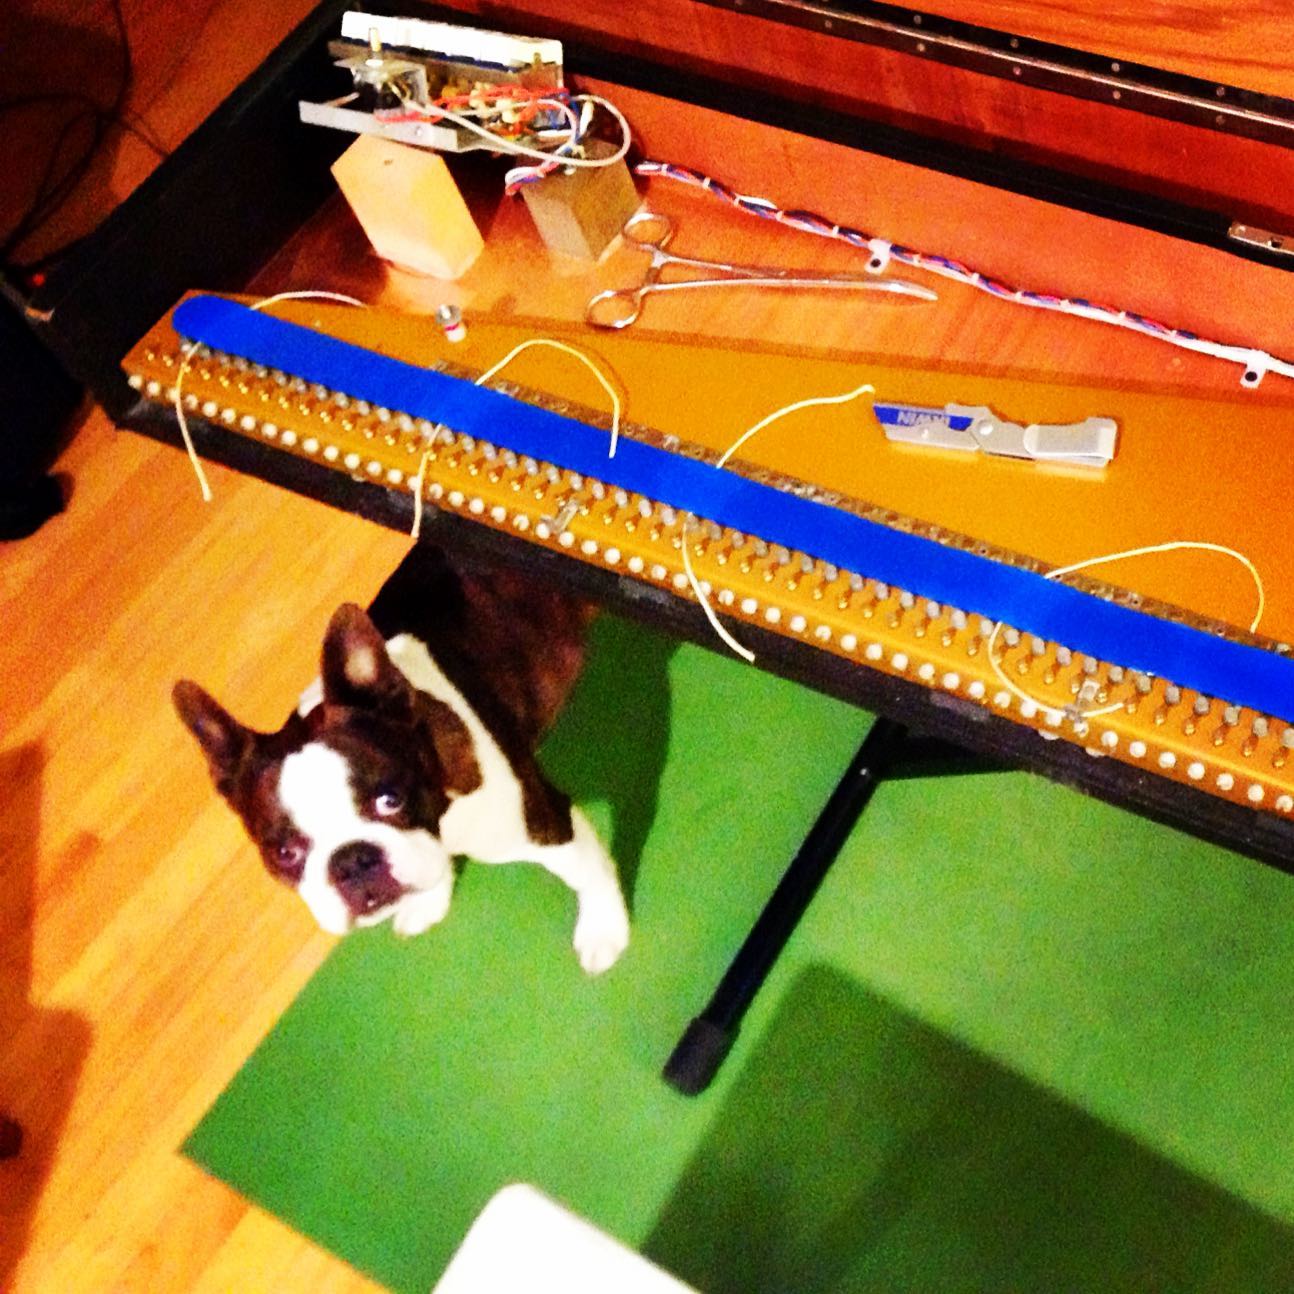 That time Miles helped me restring my Clavinet